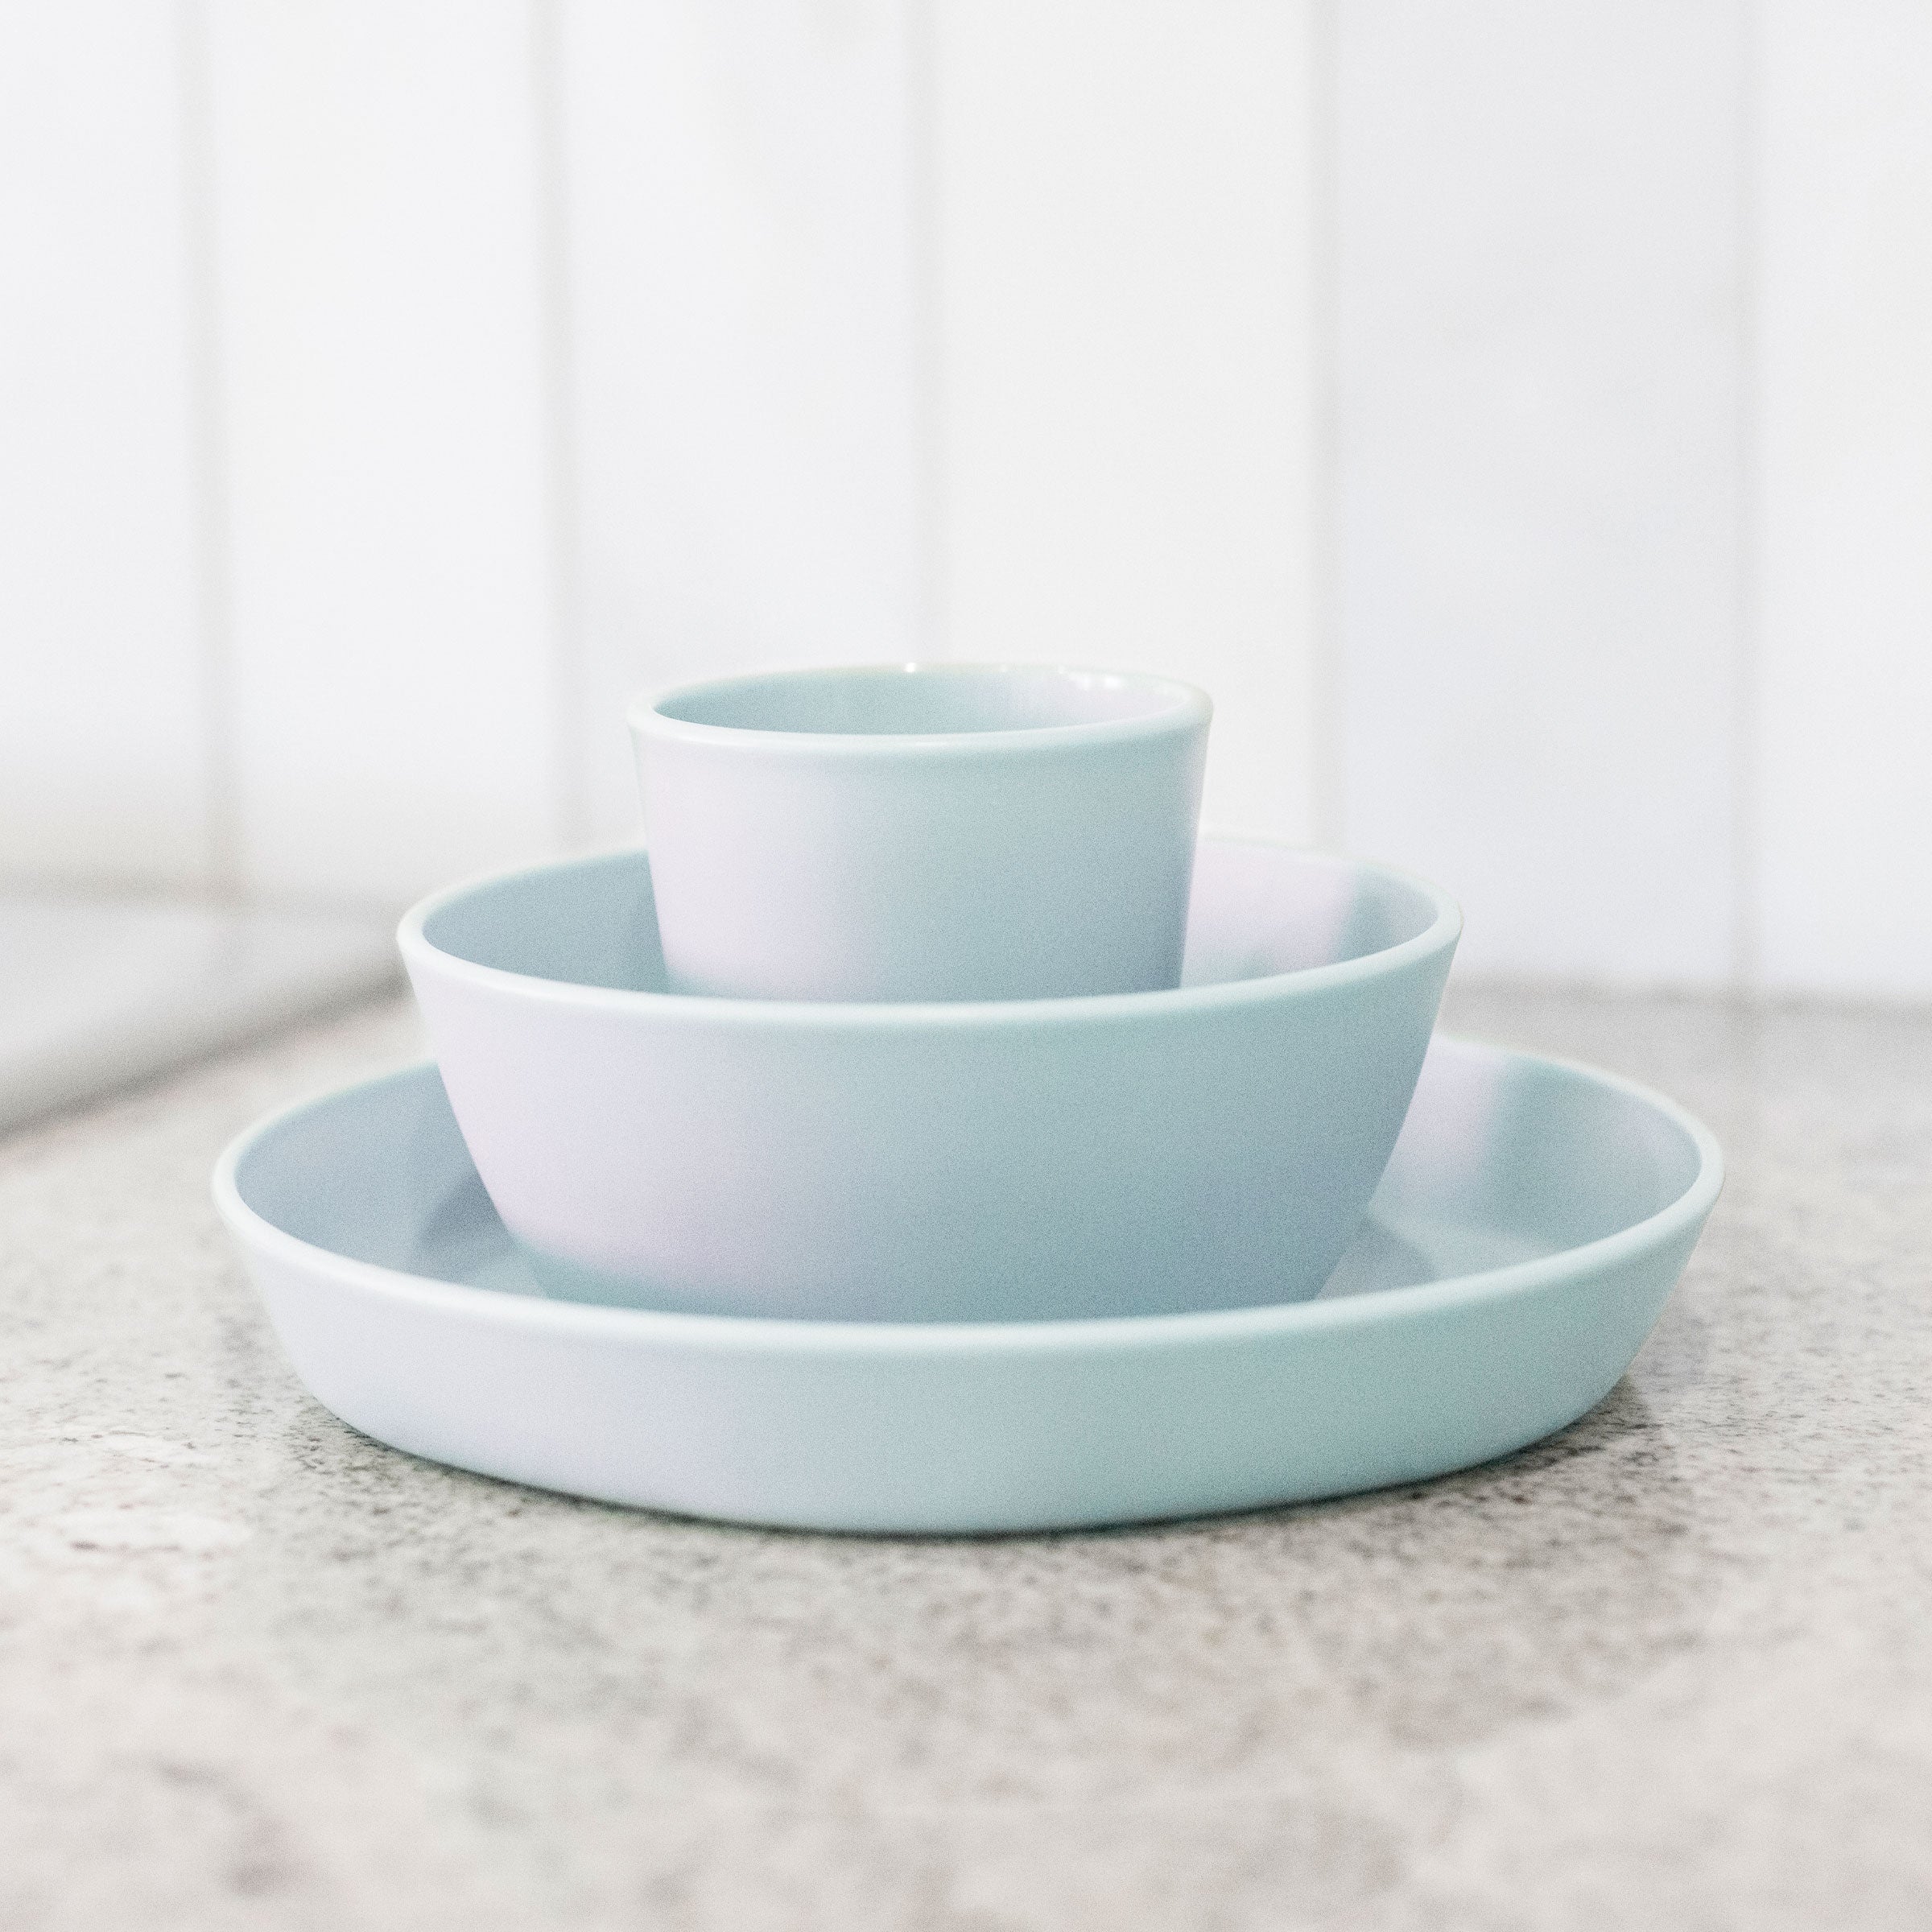 Tiny Twinkle - Tableware 3 Pack Box Set - Cup, Bowl and Plate - Ice Blue